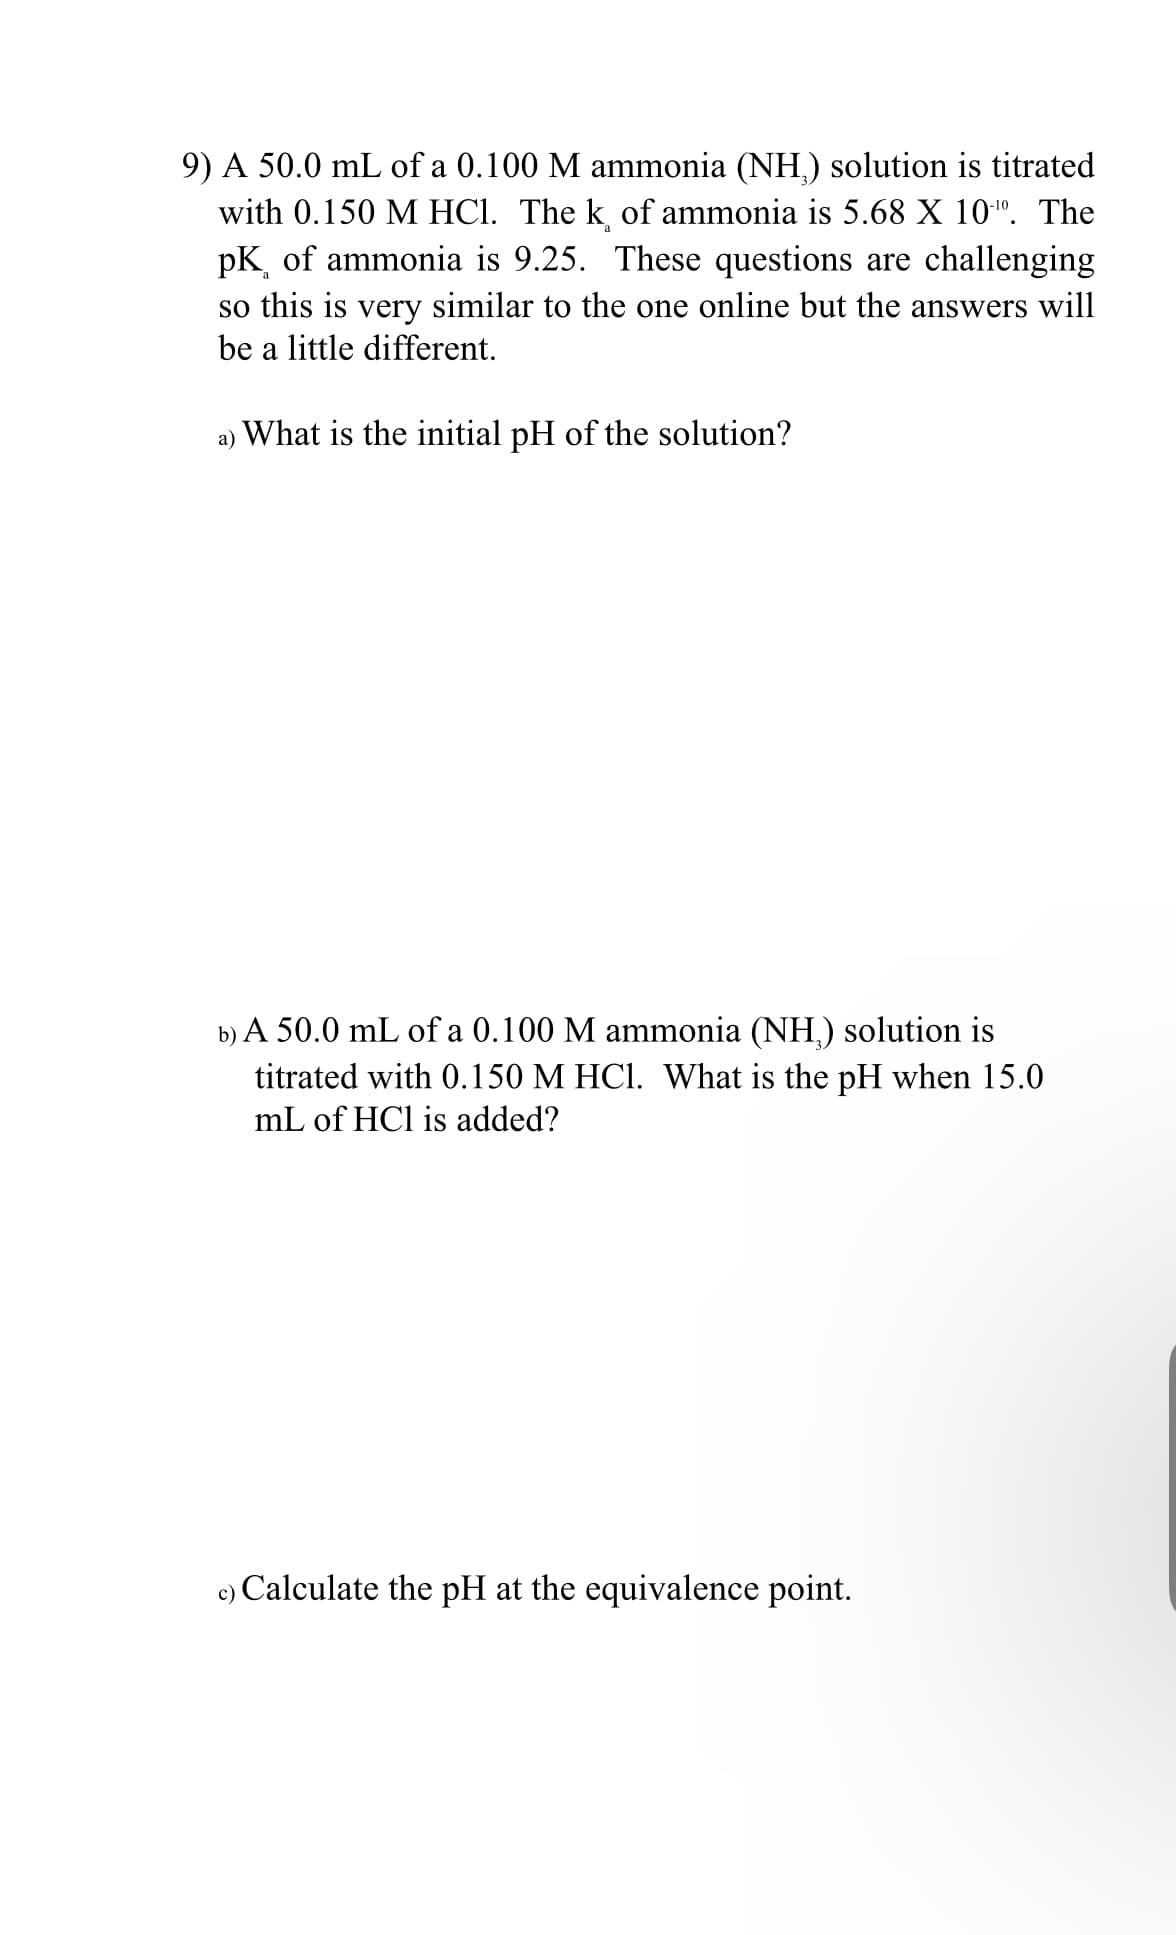 9) A 50.0 mL of a 0.100 M ammonia (NH,) solution is titrated
with 0.150 M HCl. The k of ammonia is 5.68 X 10". The
pK of ammonia is 9.25. These questions are challenging
so this is very similar to the one online but the answers will
be a little different.
а)
What is the initial pH of the solution?
b) A 50.0 mL of a 0.100 M ammonia (NH,) solution is
titrated with 0.150 M HCI. What is the pH when 15.0
mL of HCl is added?
c) Calculate the pH at the equivalence point.
